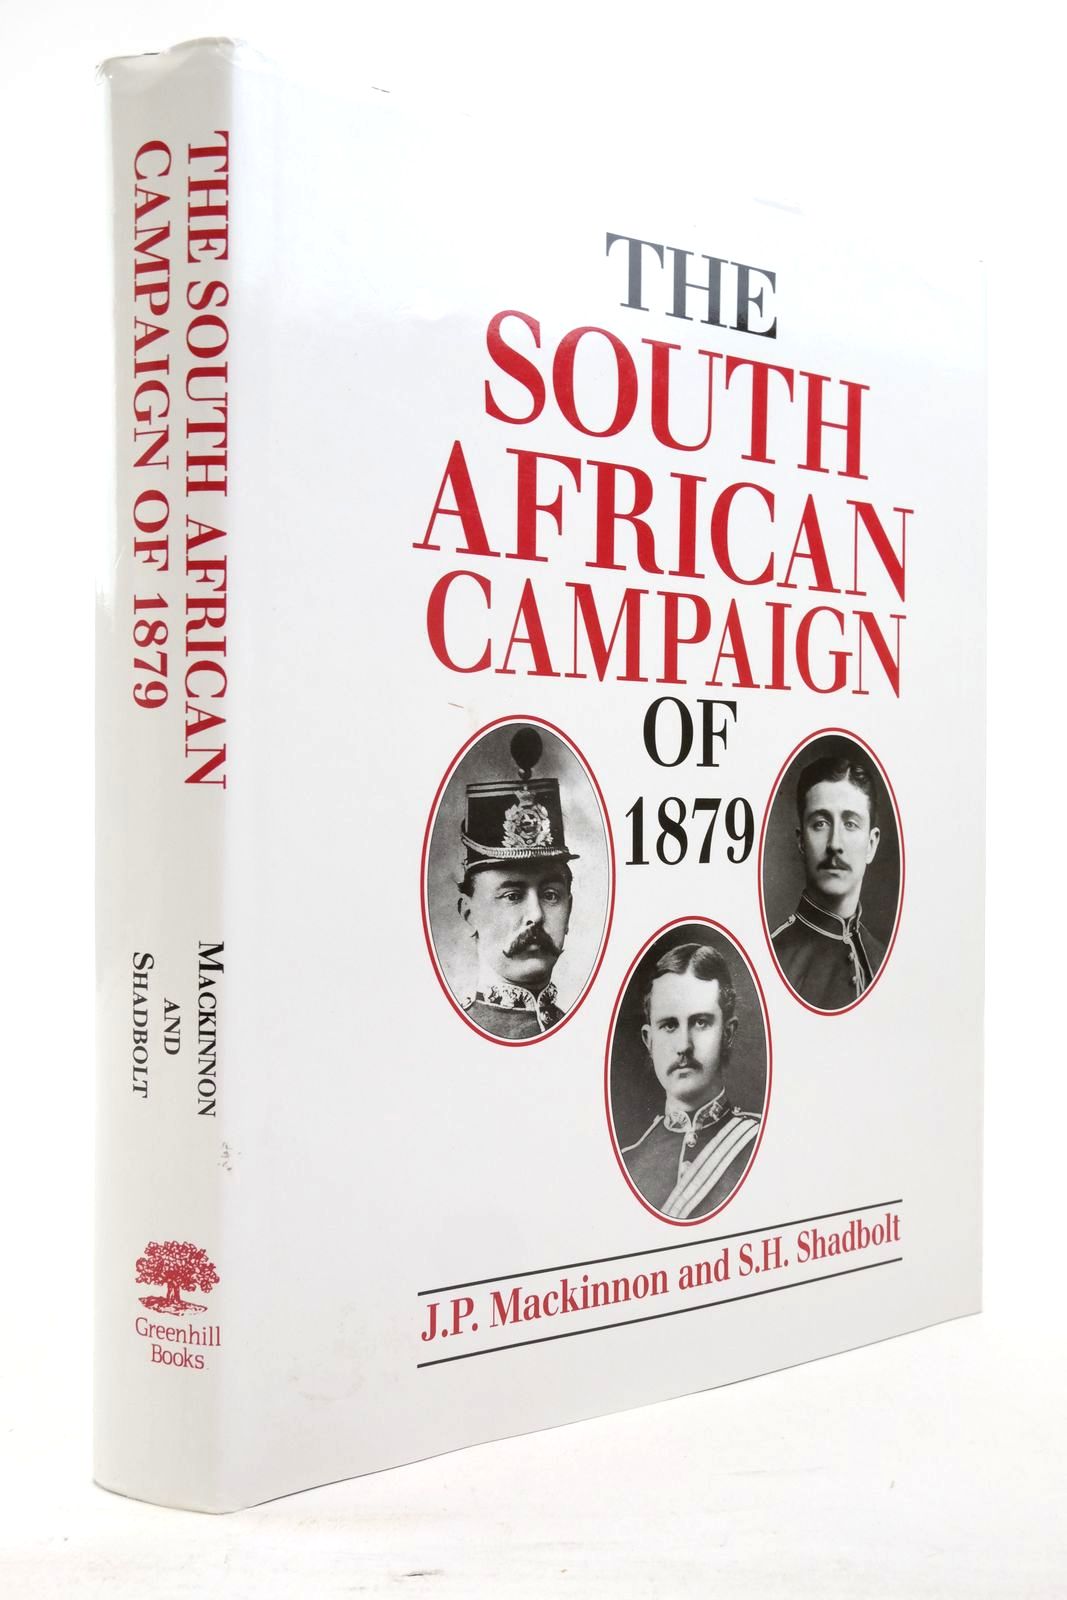 Photo of THE SOUTH AFRICAN CAMPAIGN OF 1879 written by Mackinnon, J.P. Shadbolt, S.H. published by Greenhill Books, Stackpole Books (STOCK CODE: 2138378)  for sale by Stella & Rose's Books